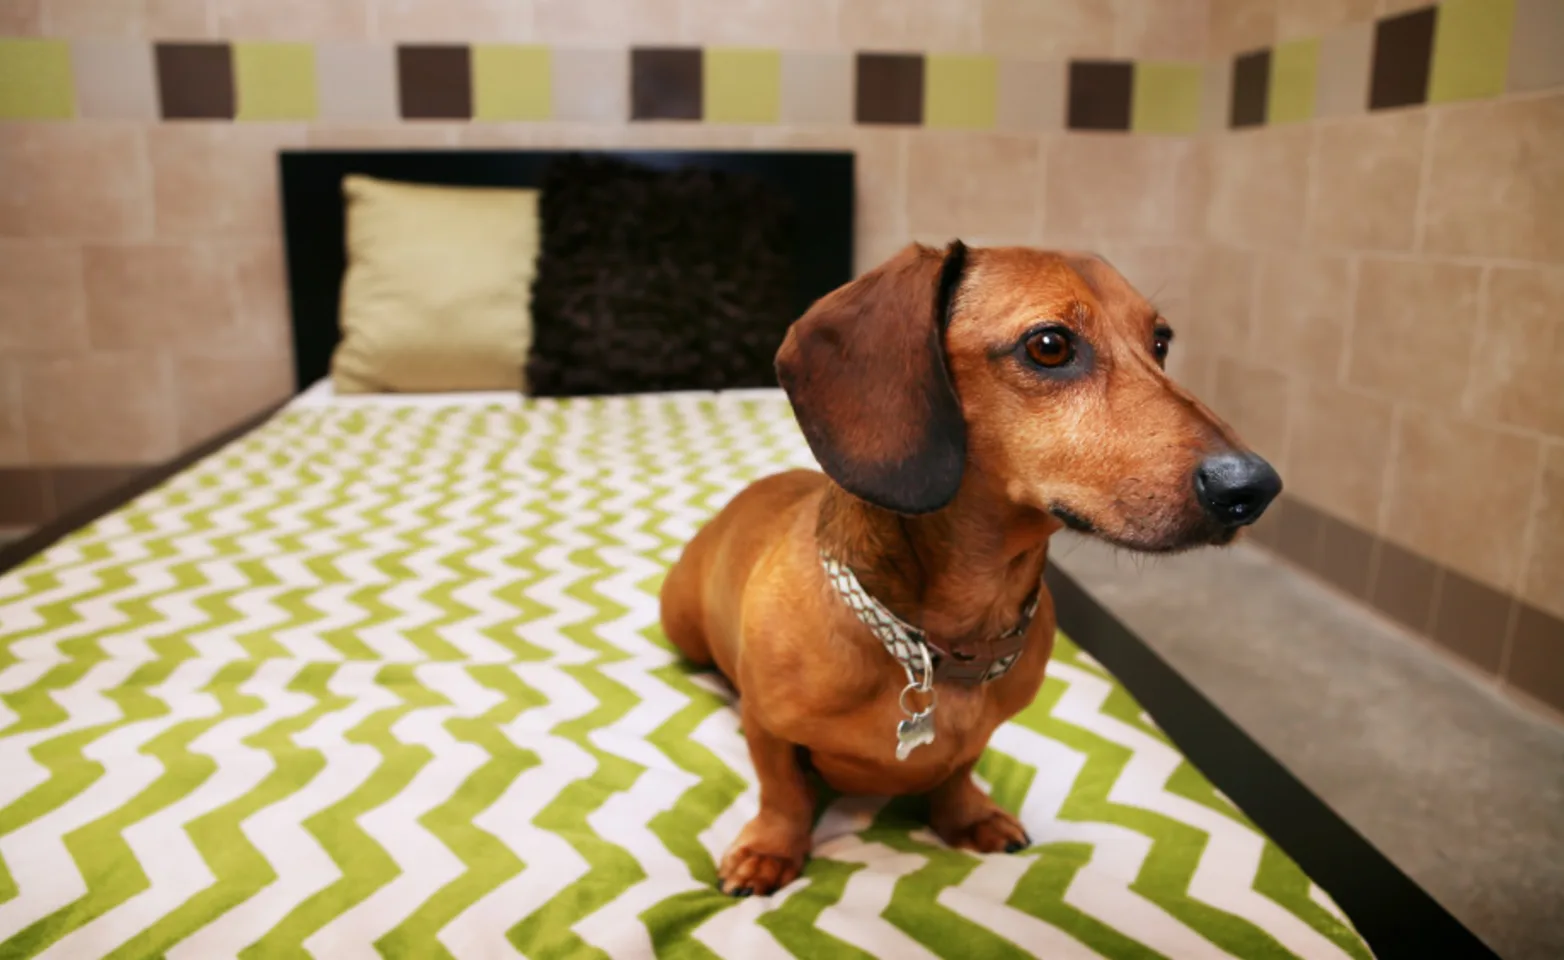 A Boarding Room Suite at Pooch Hotel with a Brown Dachshund (Dog) sitting on the bed